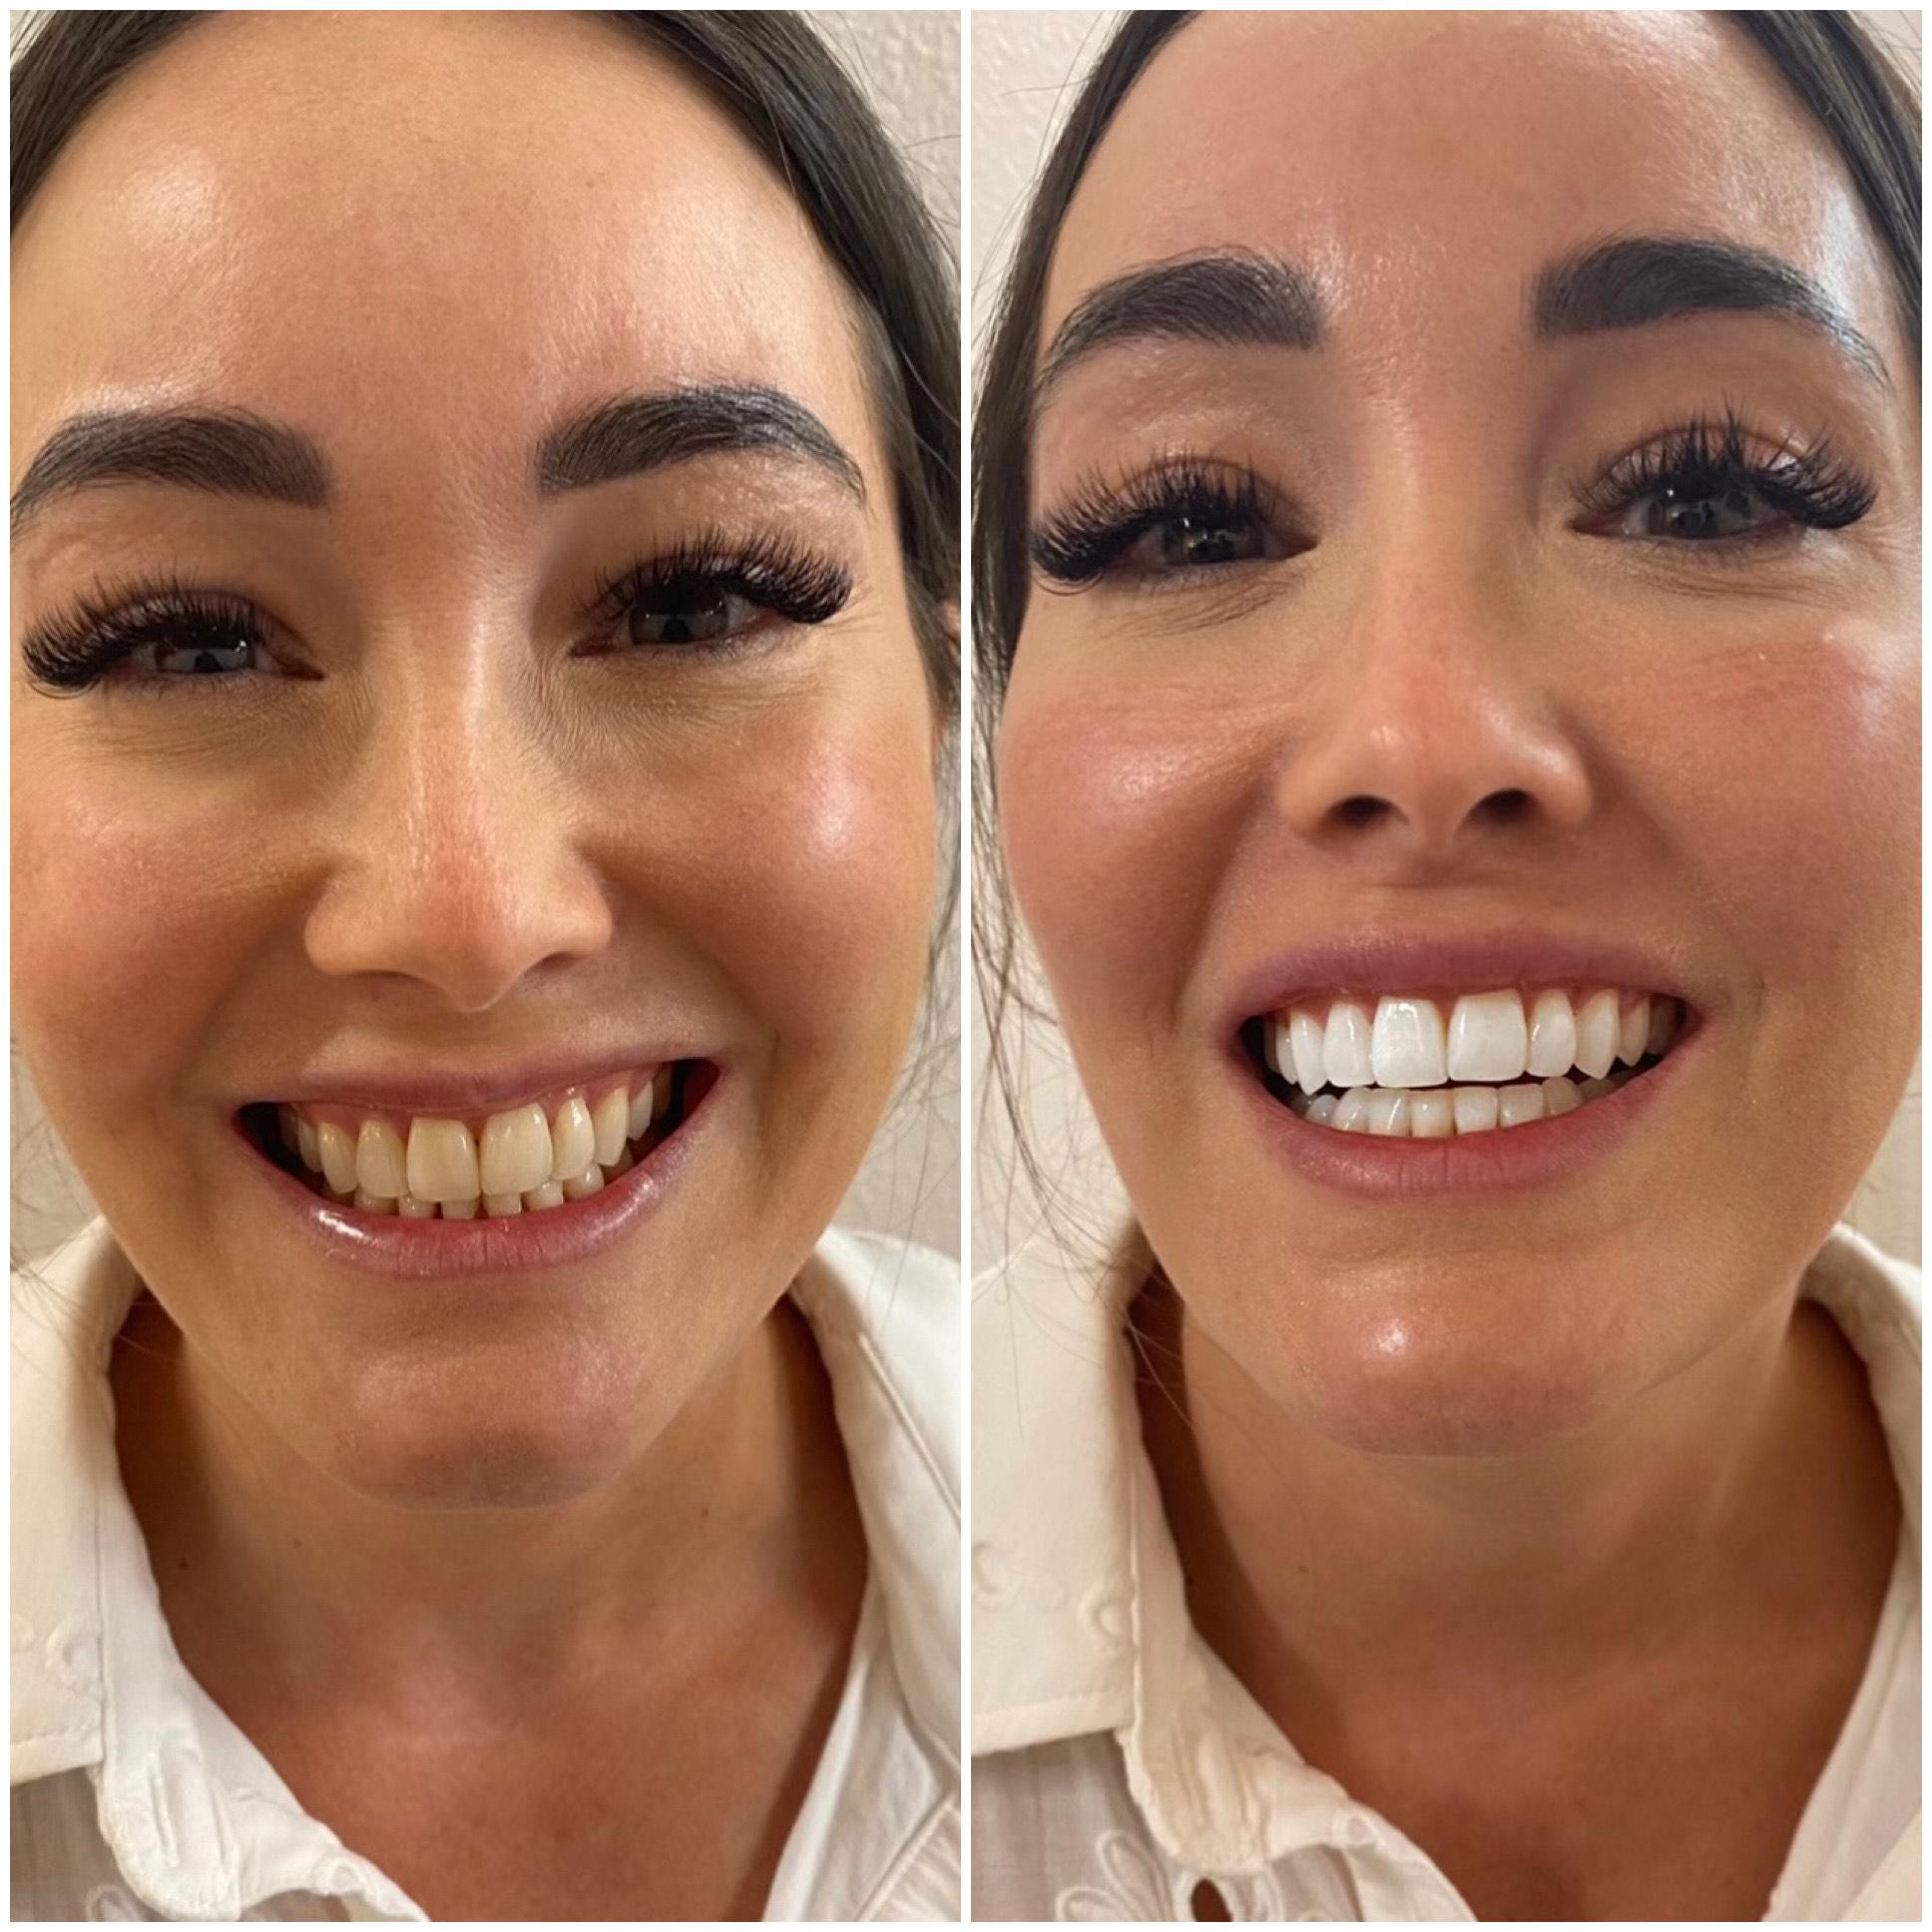 teeth whitening before and after results montreal quebec